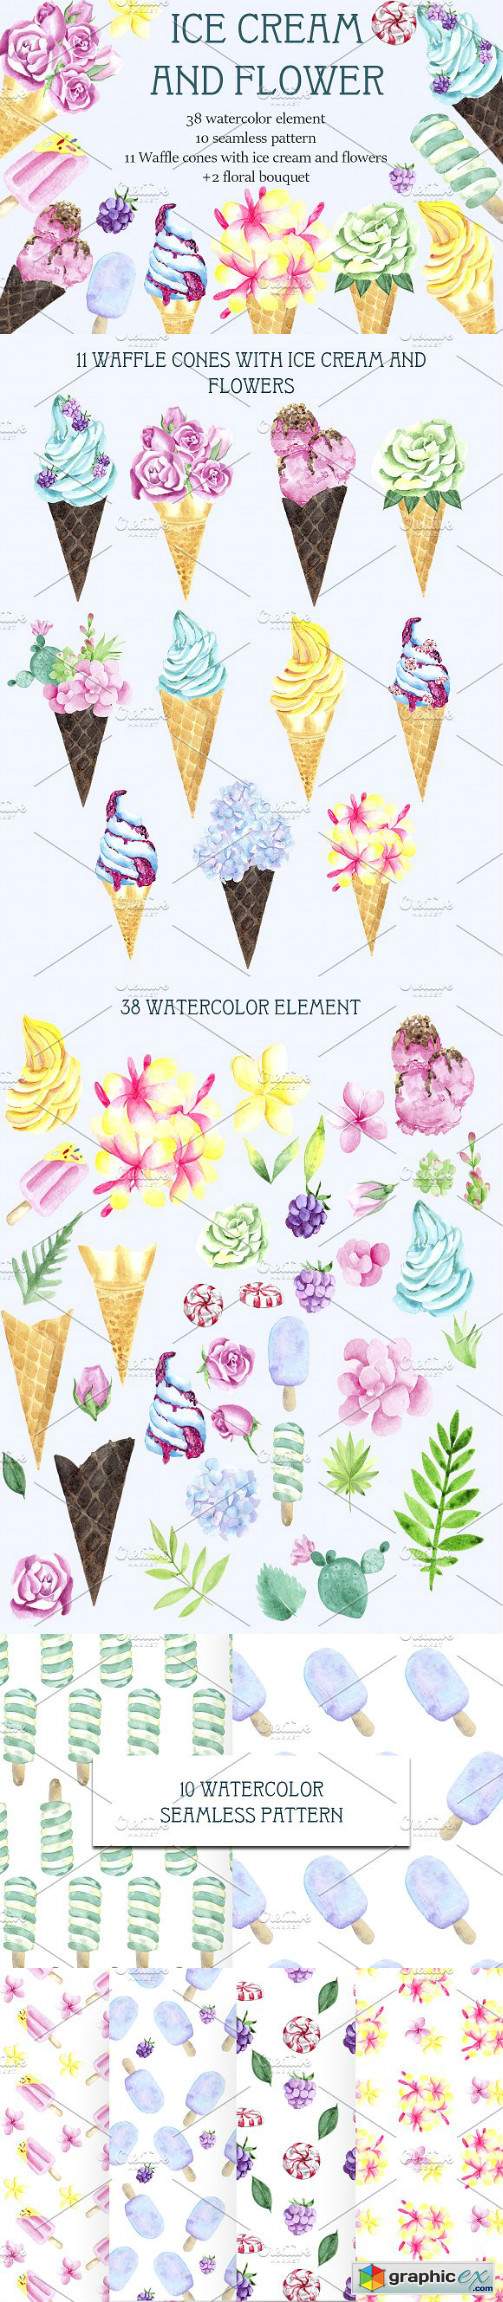 Ice cream and flower Watercolor set